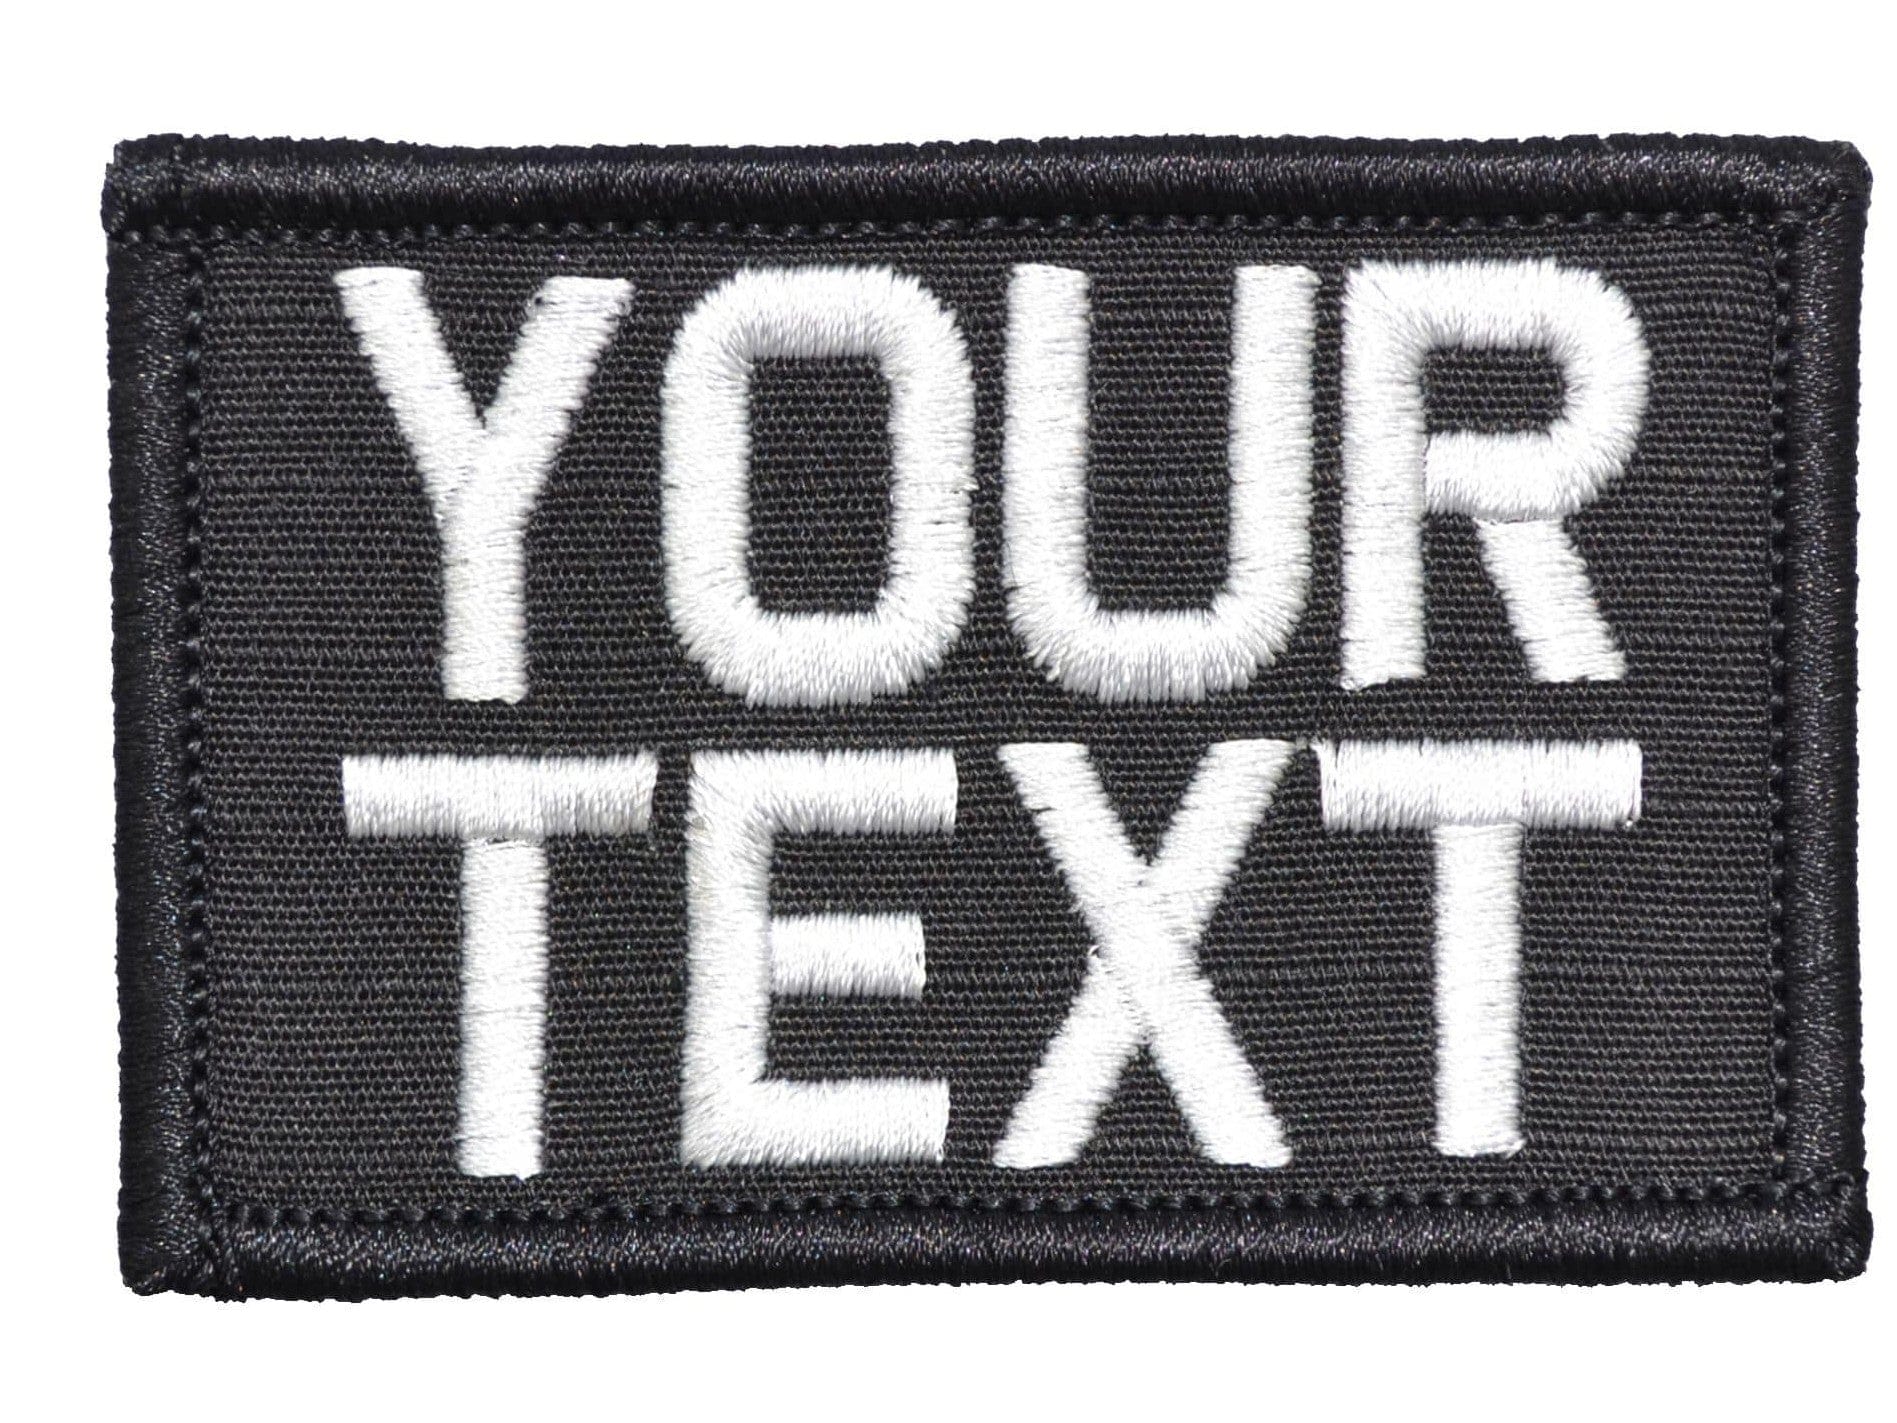  Custom Patches for Your Team Logo, Company Logo, School  Logo,Pet Name,Custom Your own Personalized Morale Patches,2x3''，Any  Logo,Sew on, Iron on,Hook & Loop (3 inch or Less, 2PCS) : Arts, Crafts 